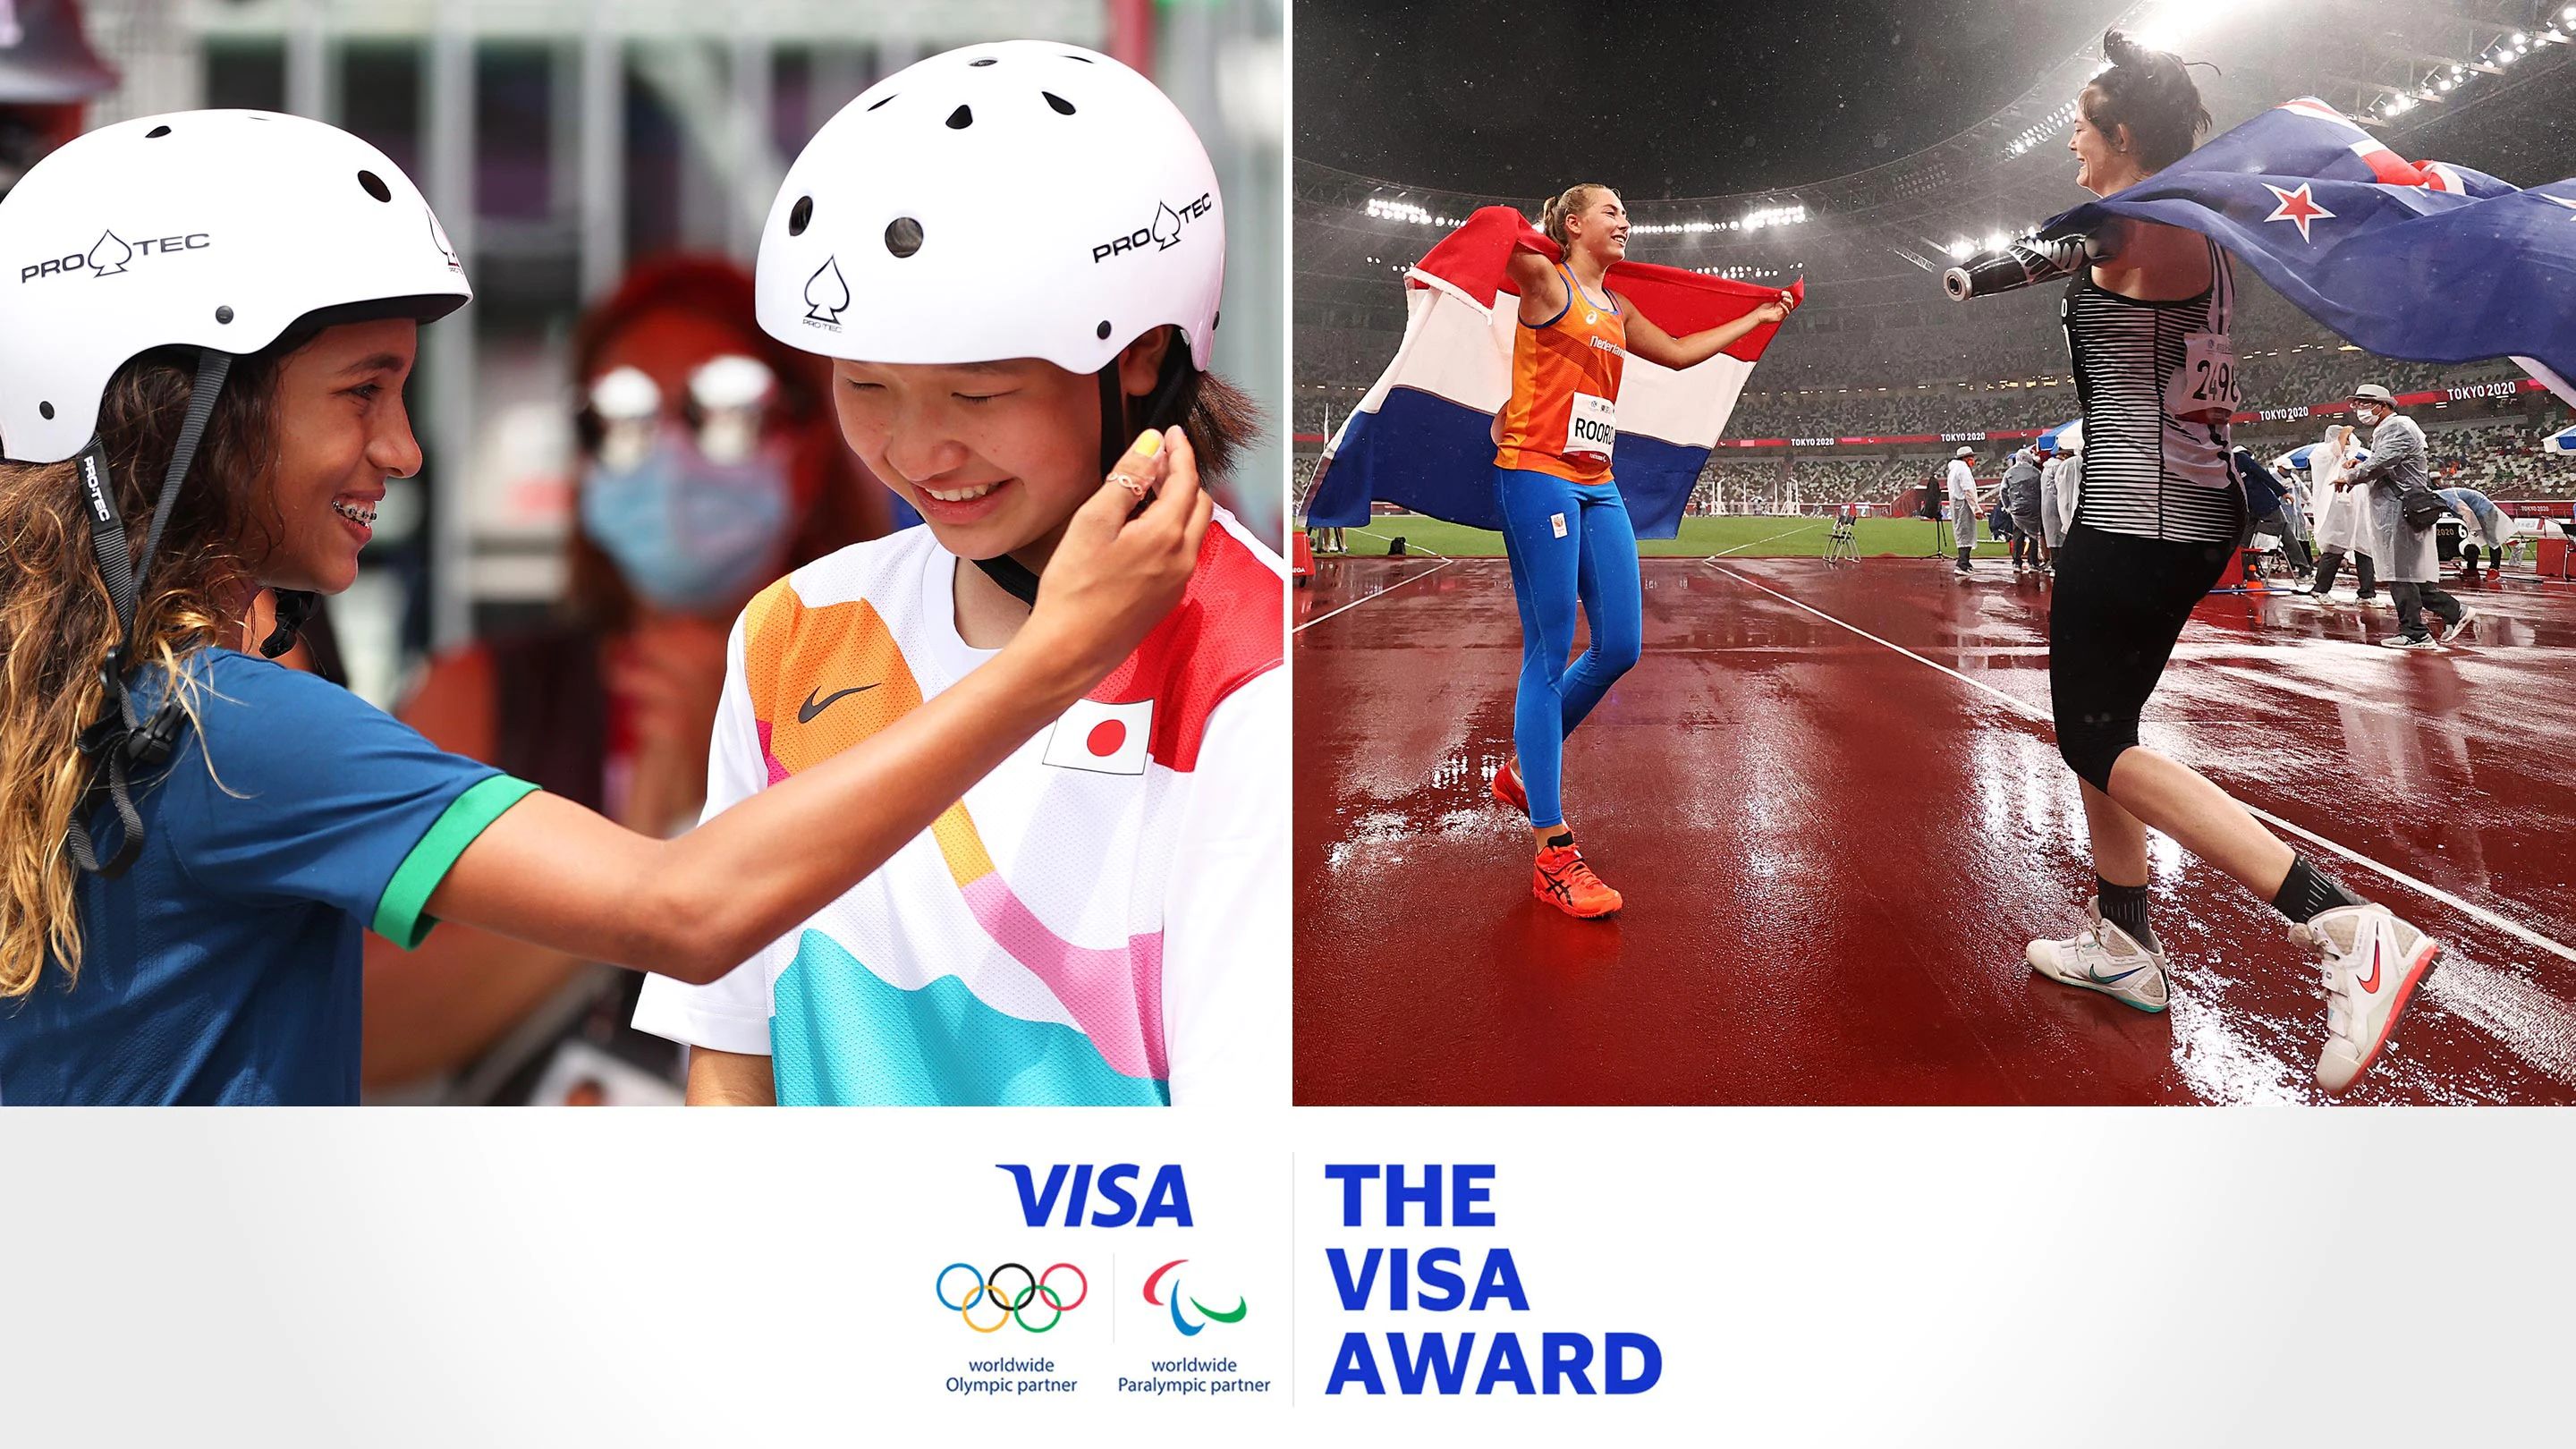 Olympic and Paralympic Visa Award winners select their charities that will receive $100,000 in donations 